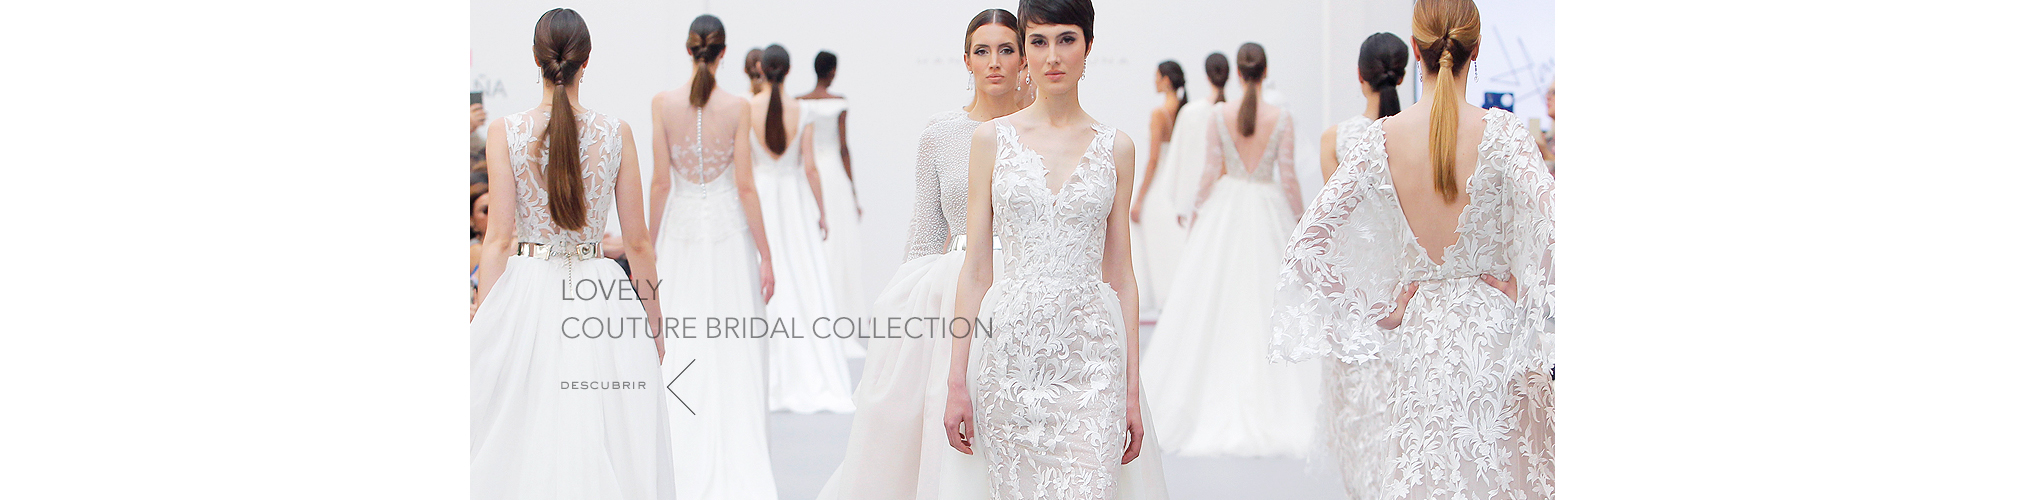 LOVELY / COUTURE BRIDAL COLLECTION